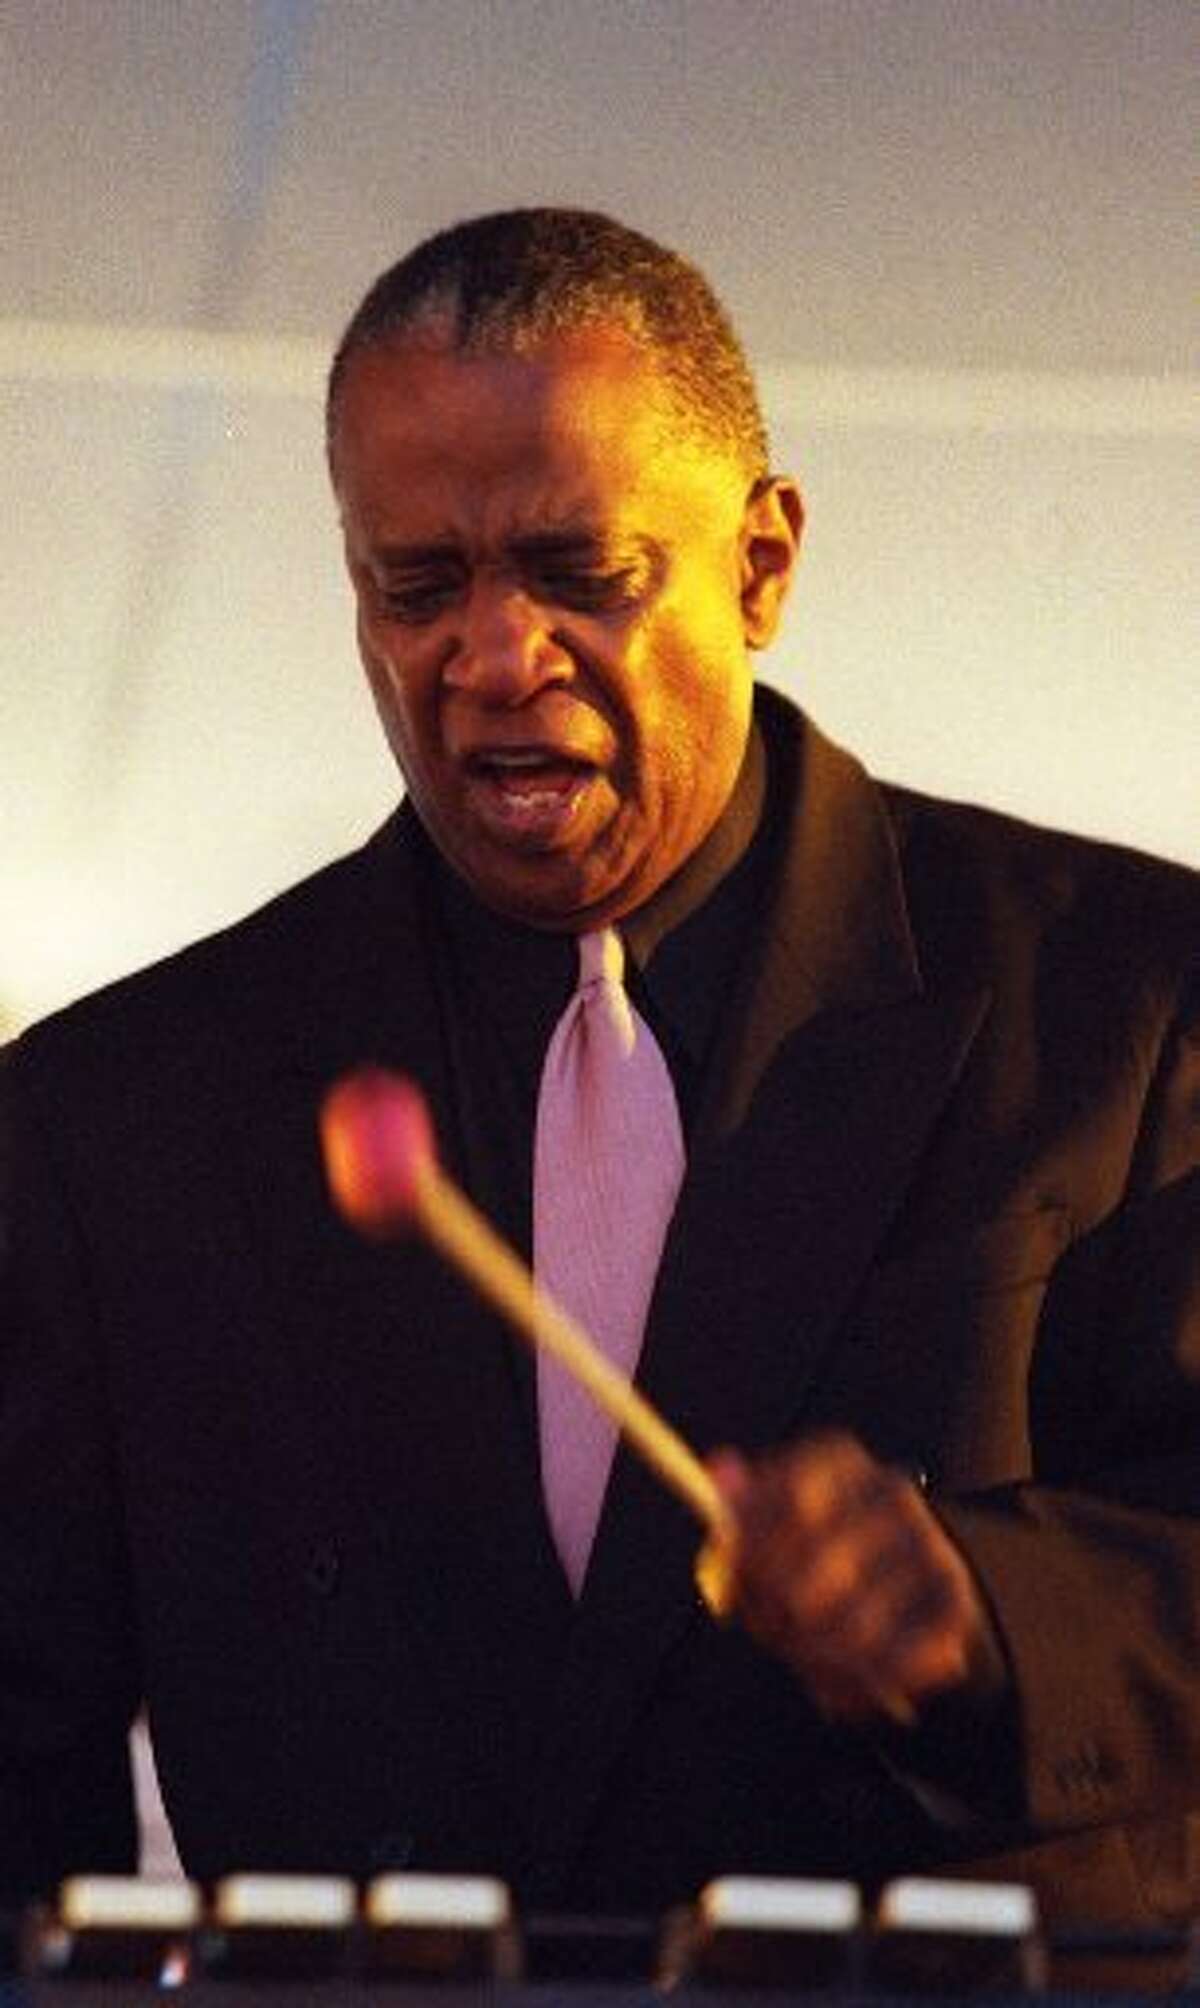 Vibraphonist Bobby Hutcherson plays at Yoshi's Oakland this week.